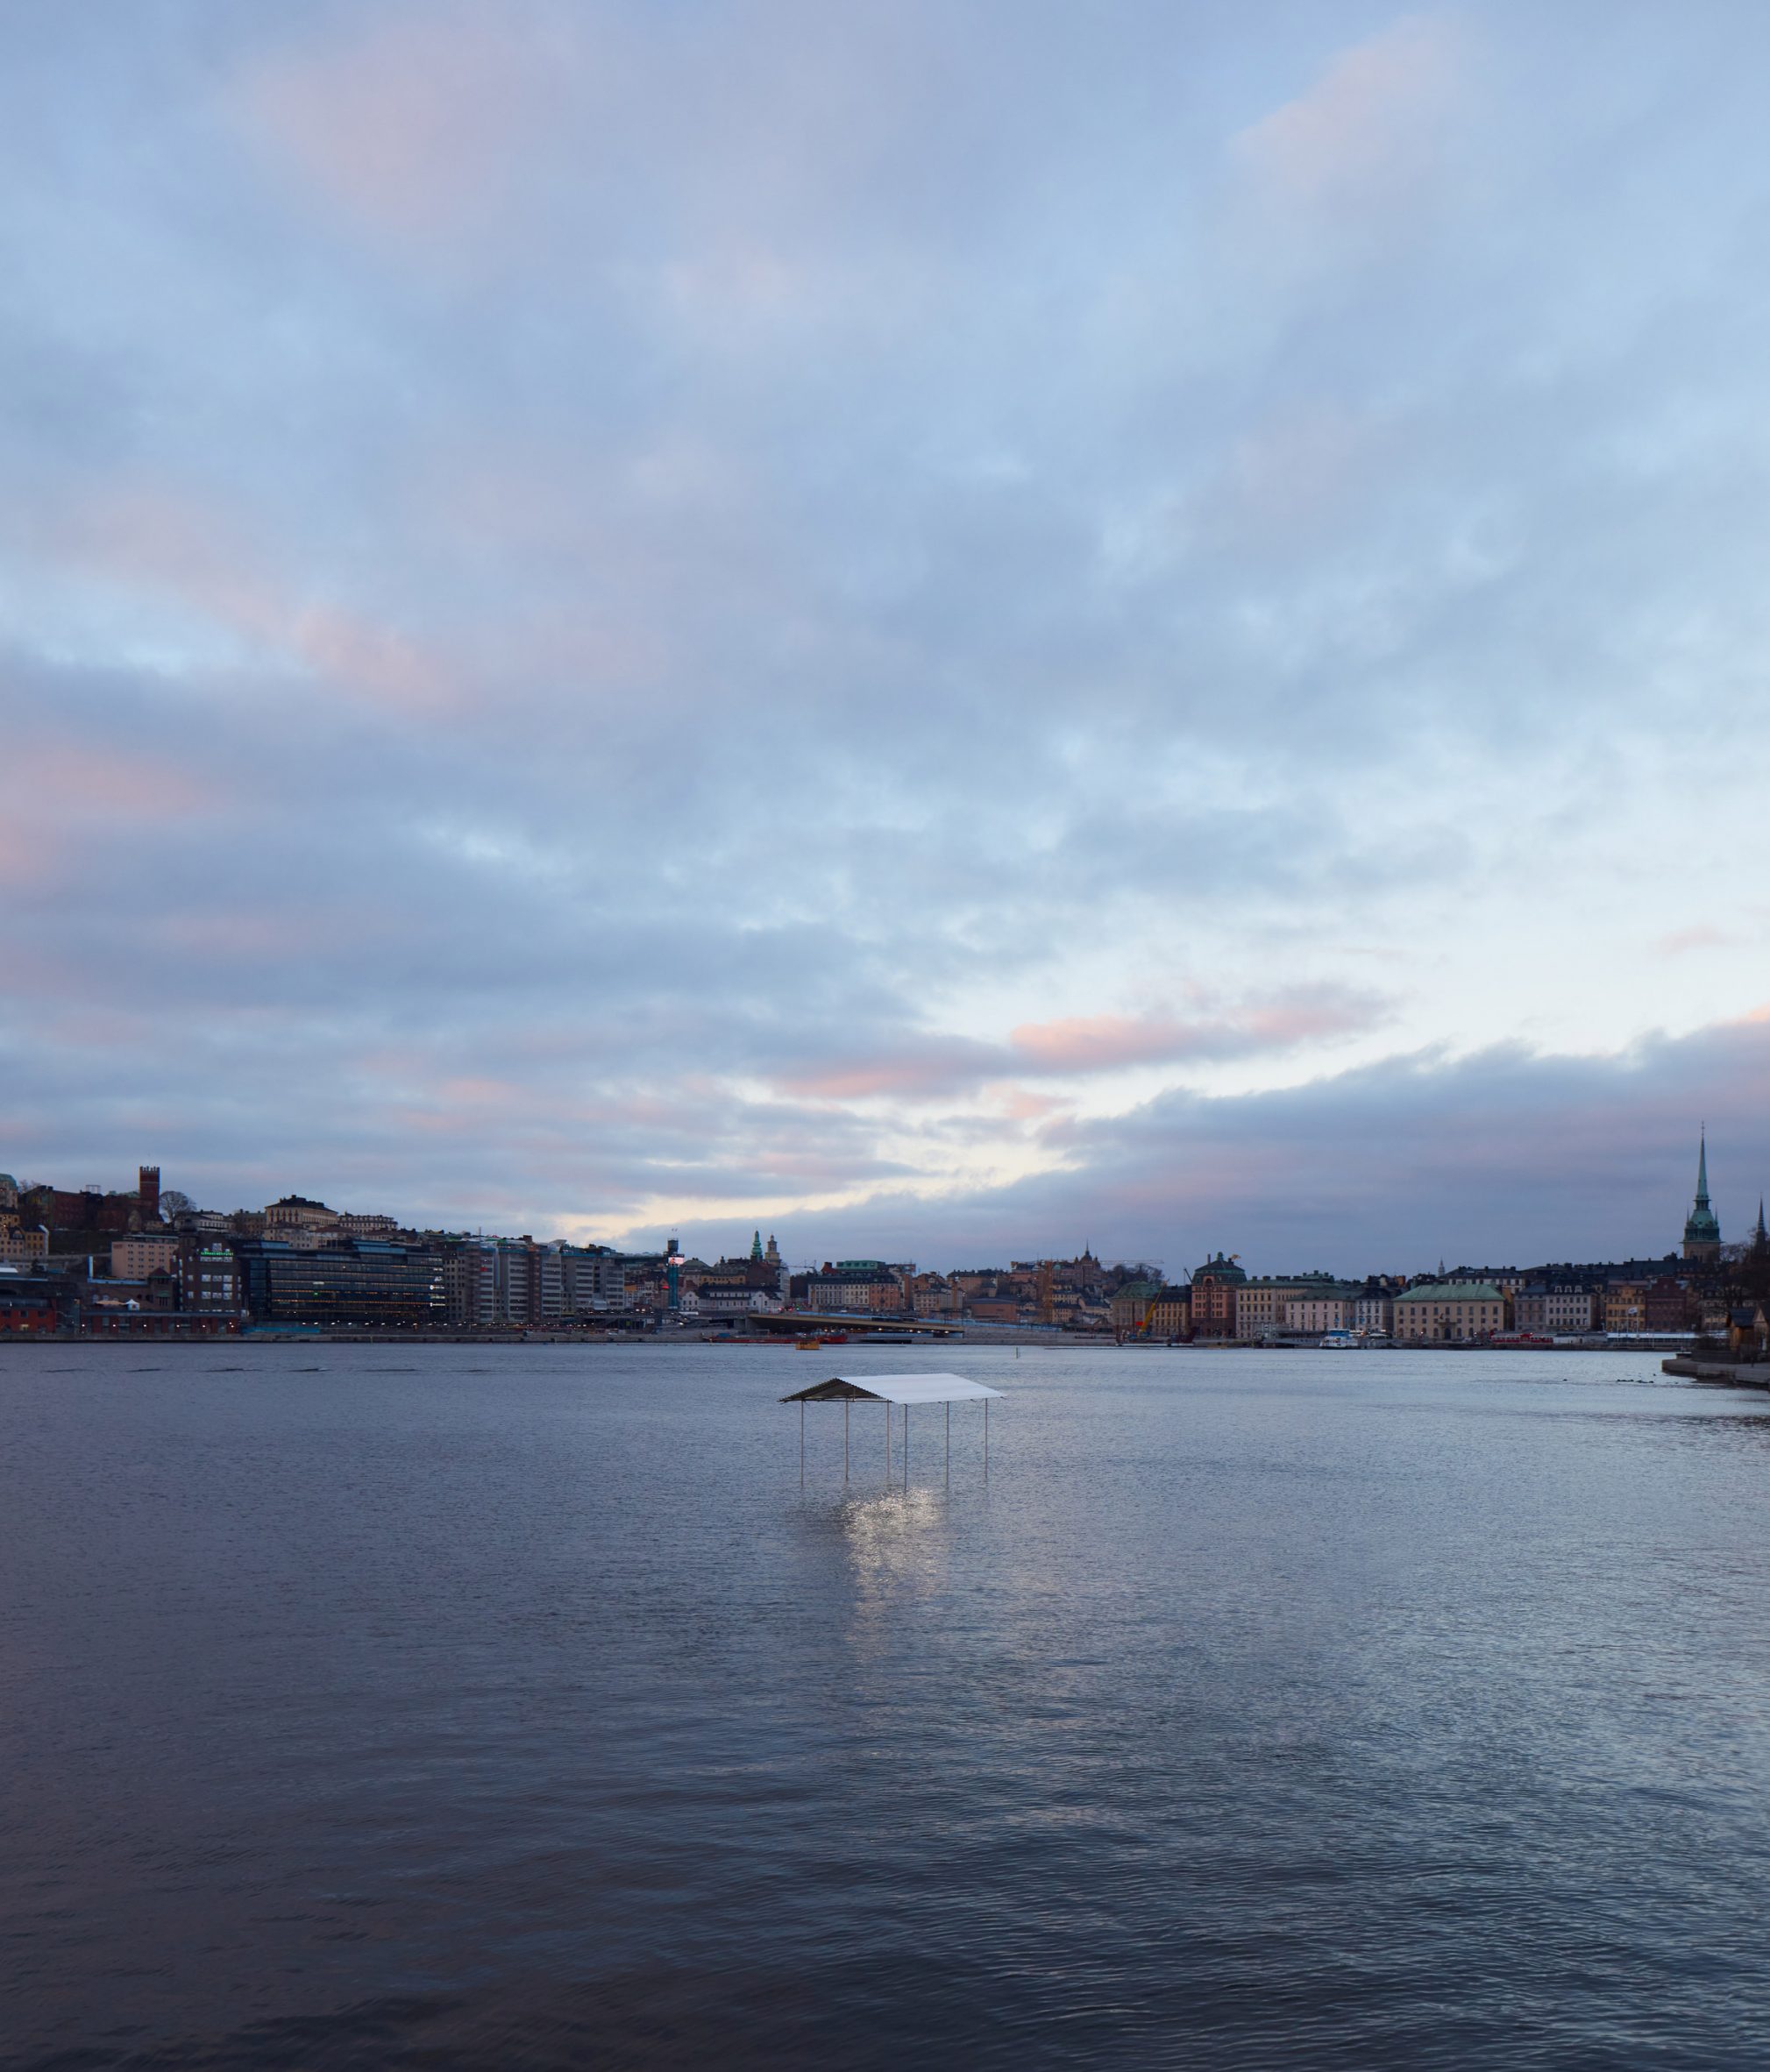 The Installation is Located in the Waters Near Skeppsholmen Island